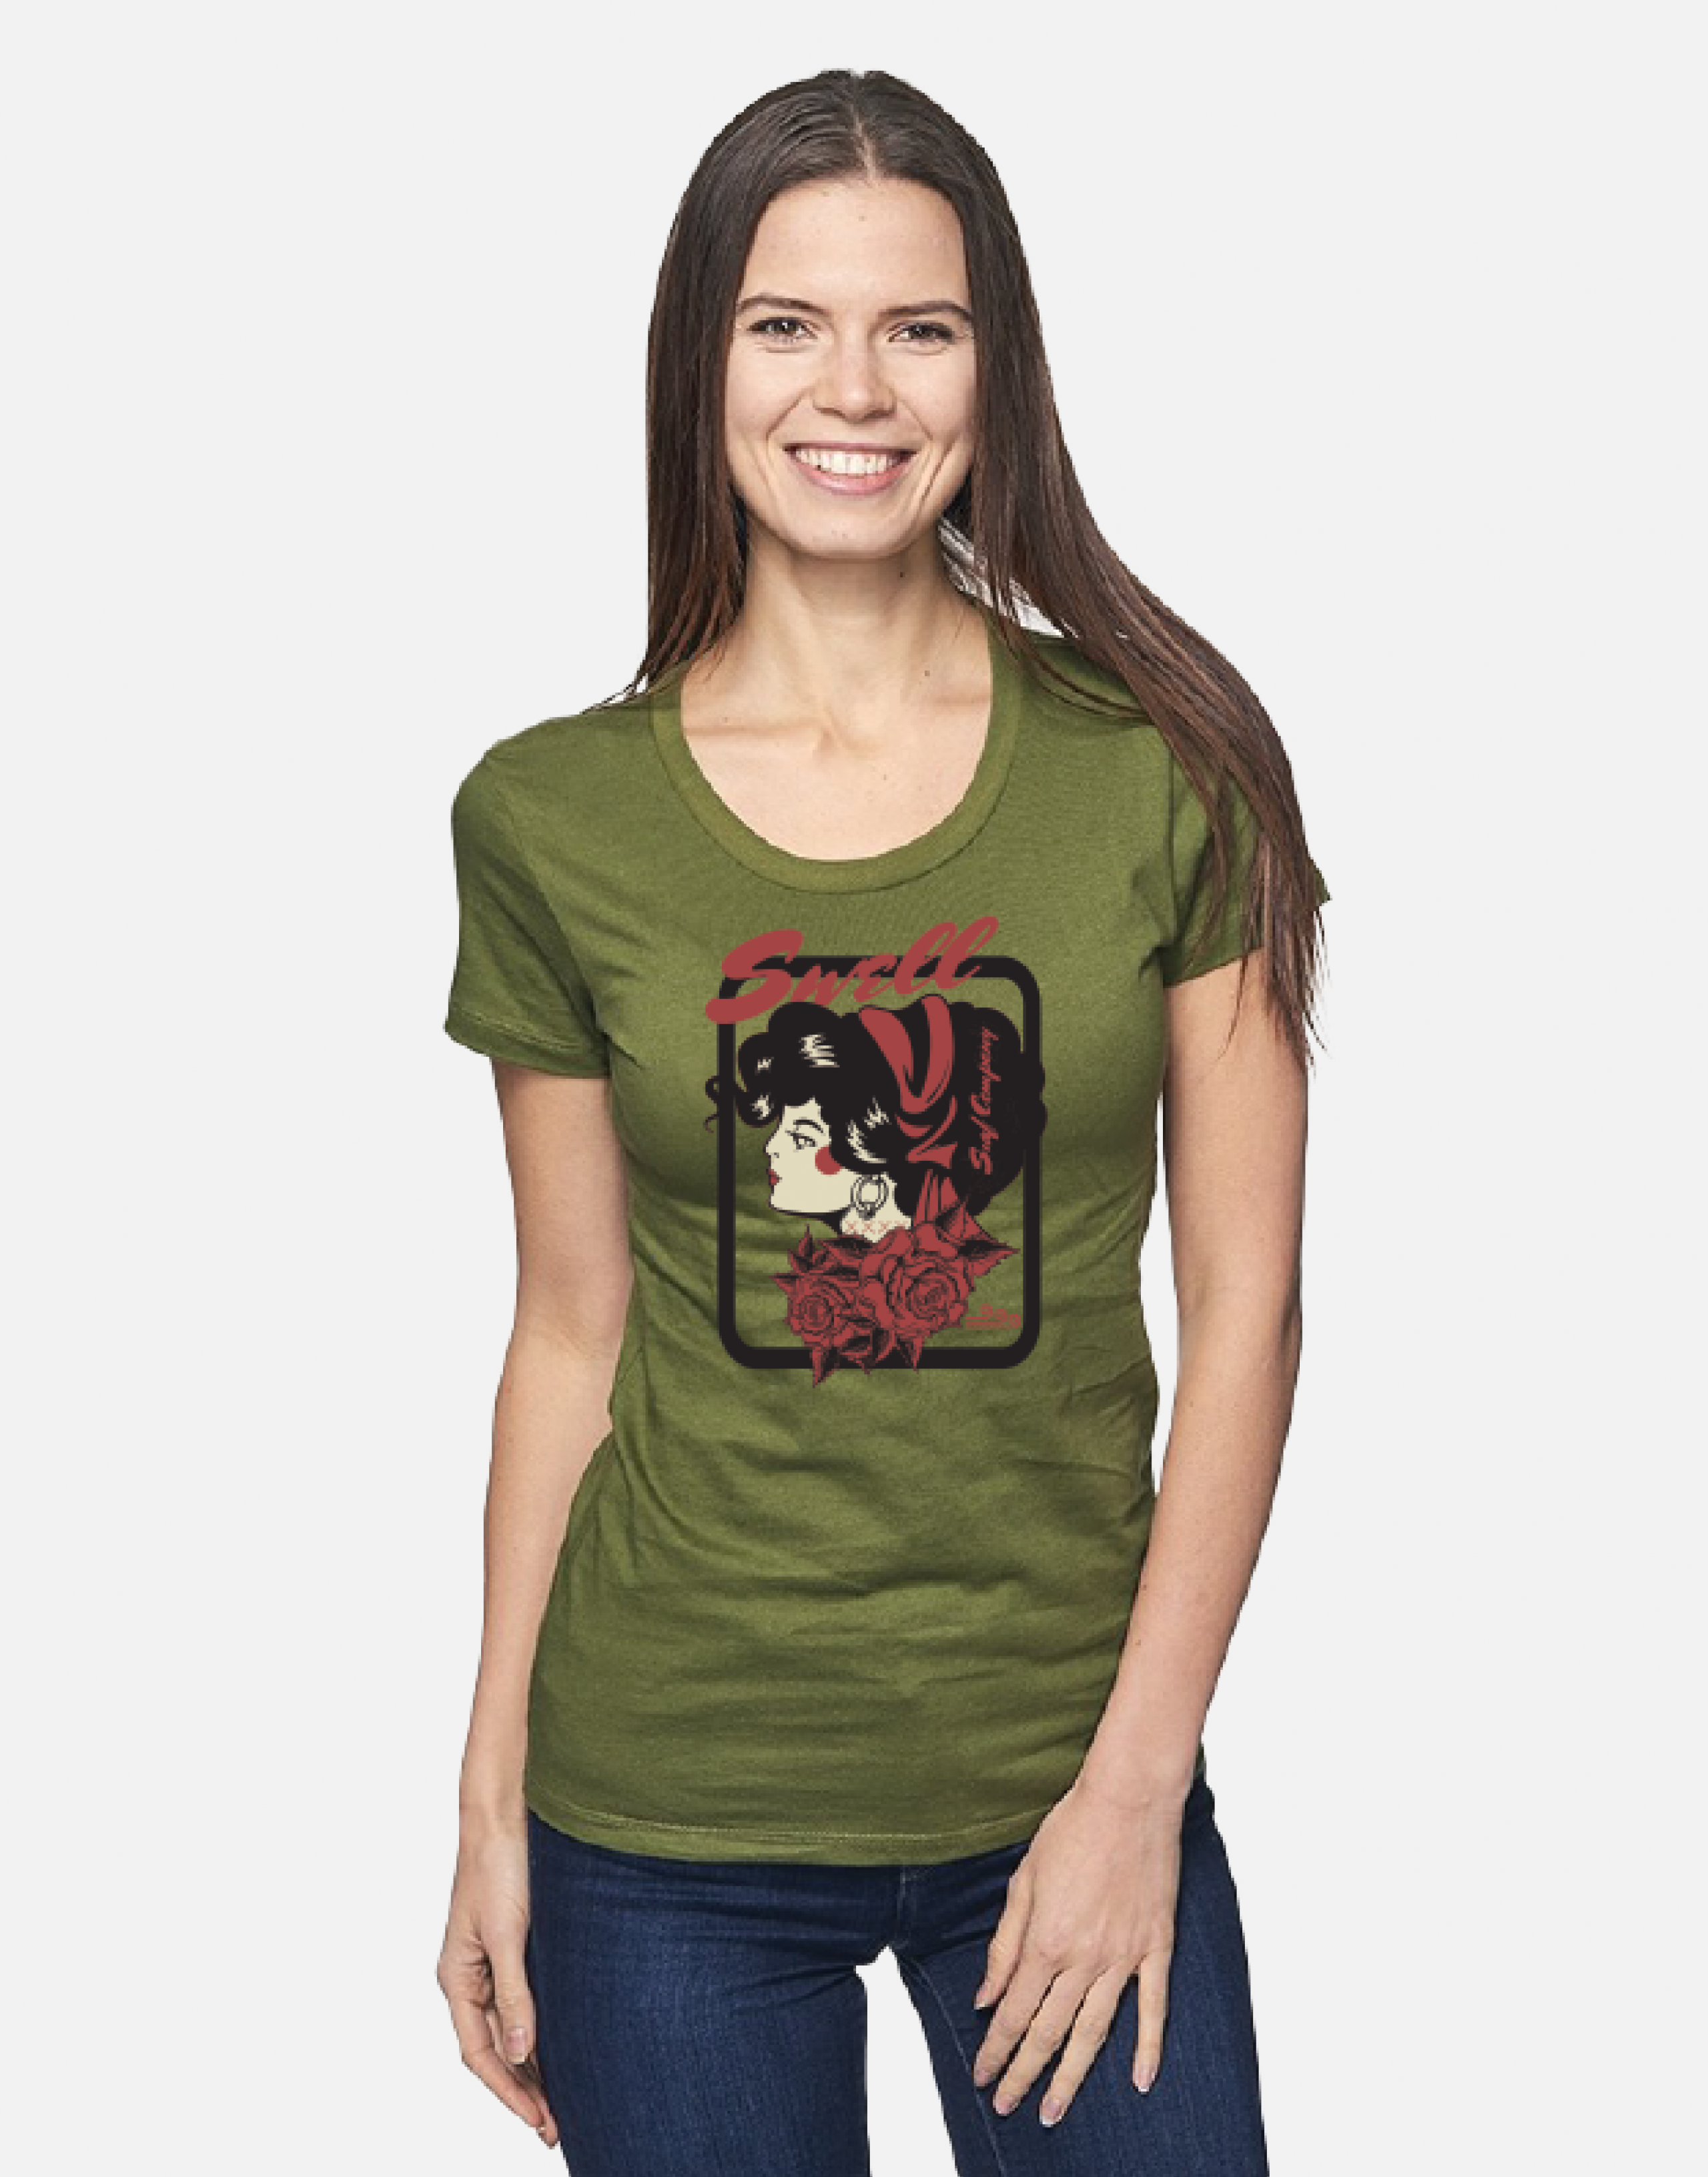 Woman wearing a moss green Swellone tshirt with Swellone logo.